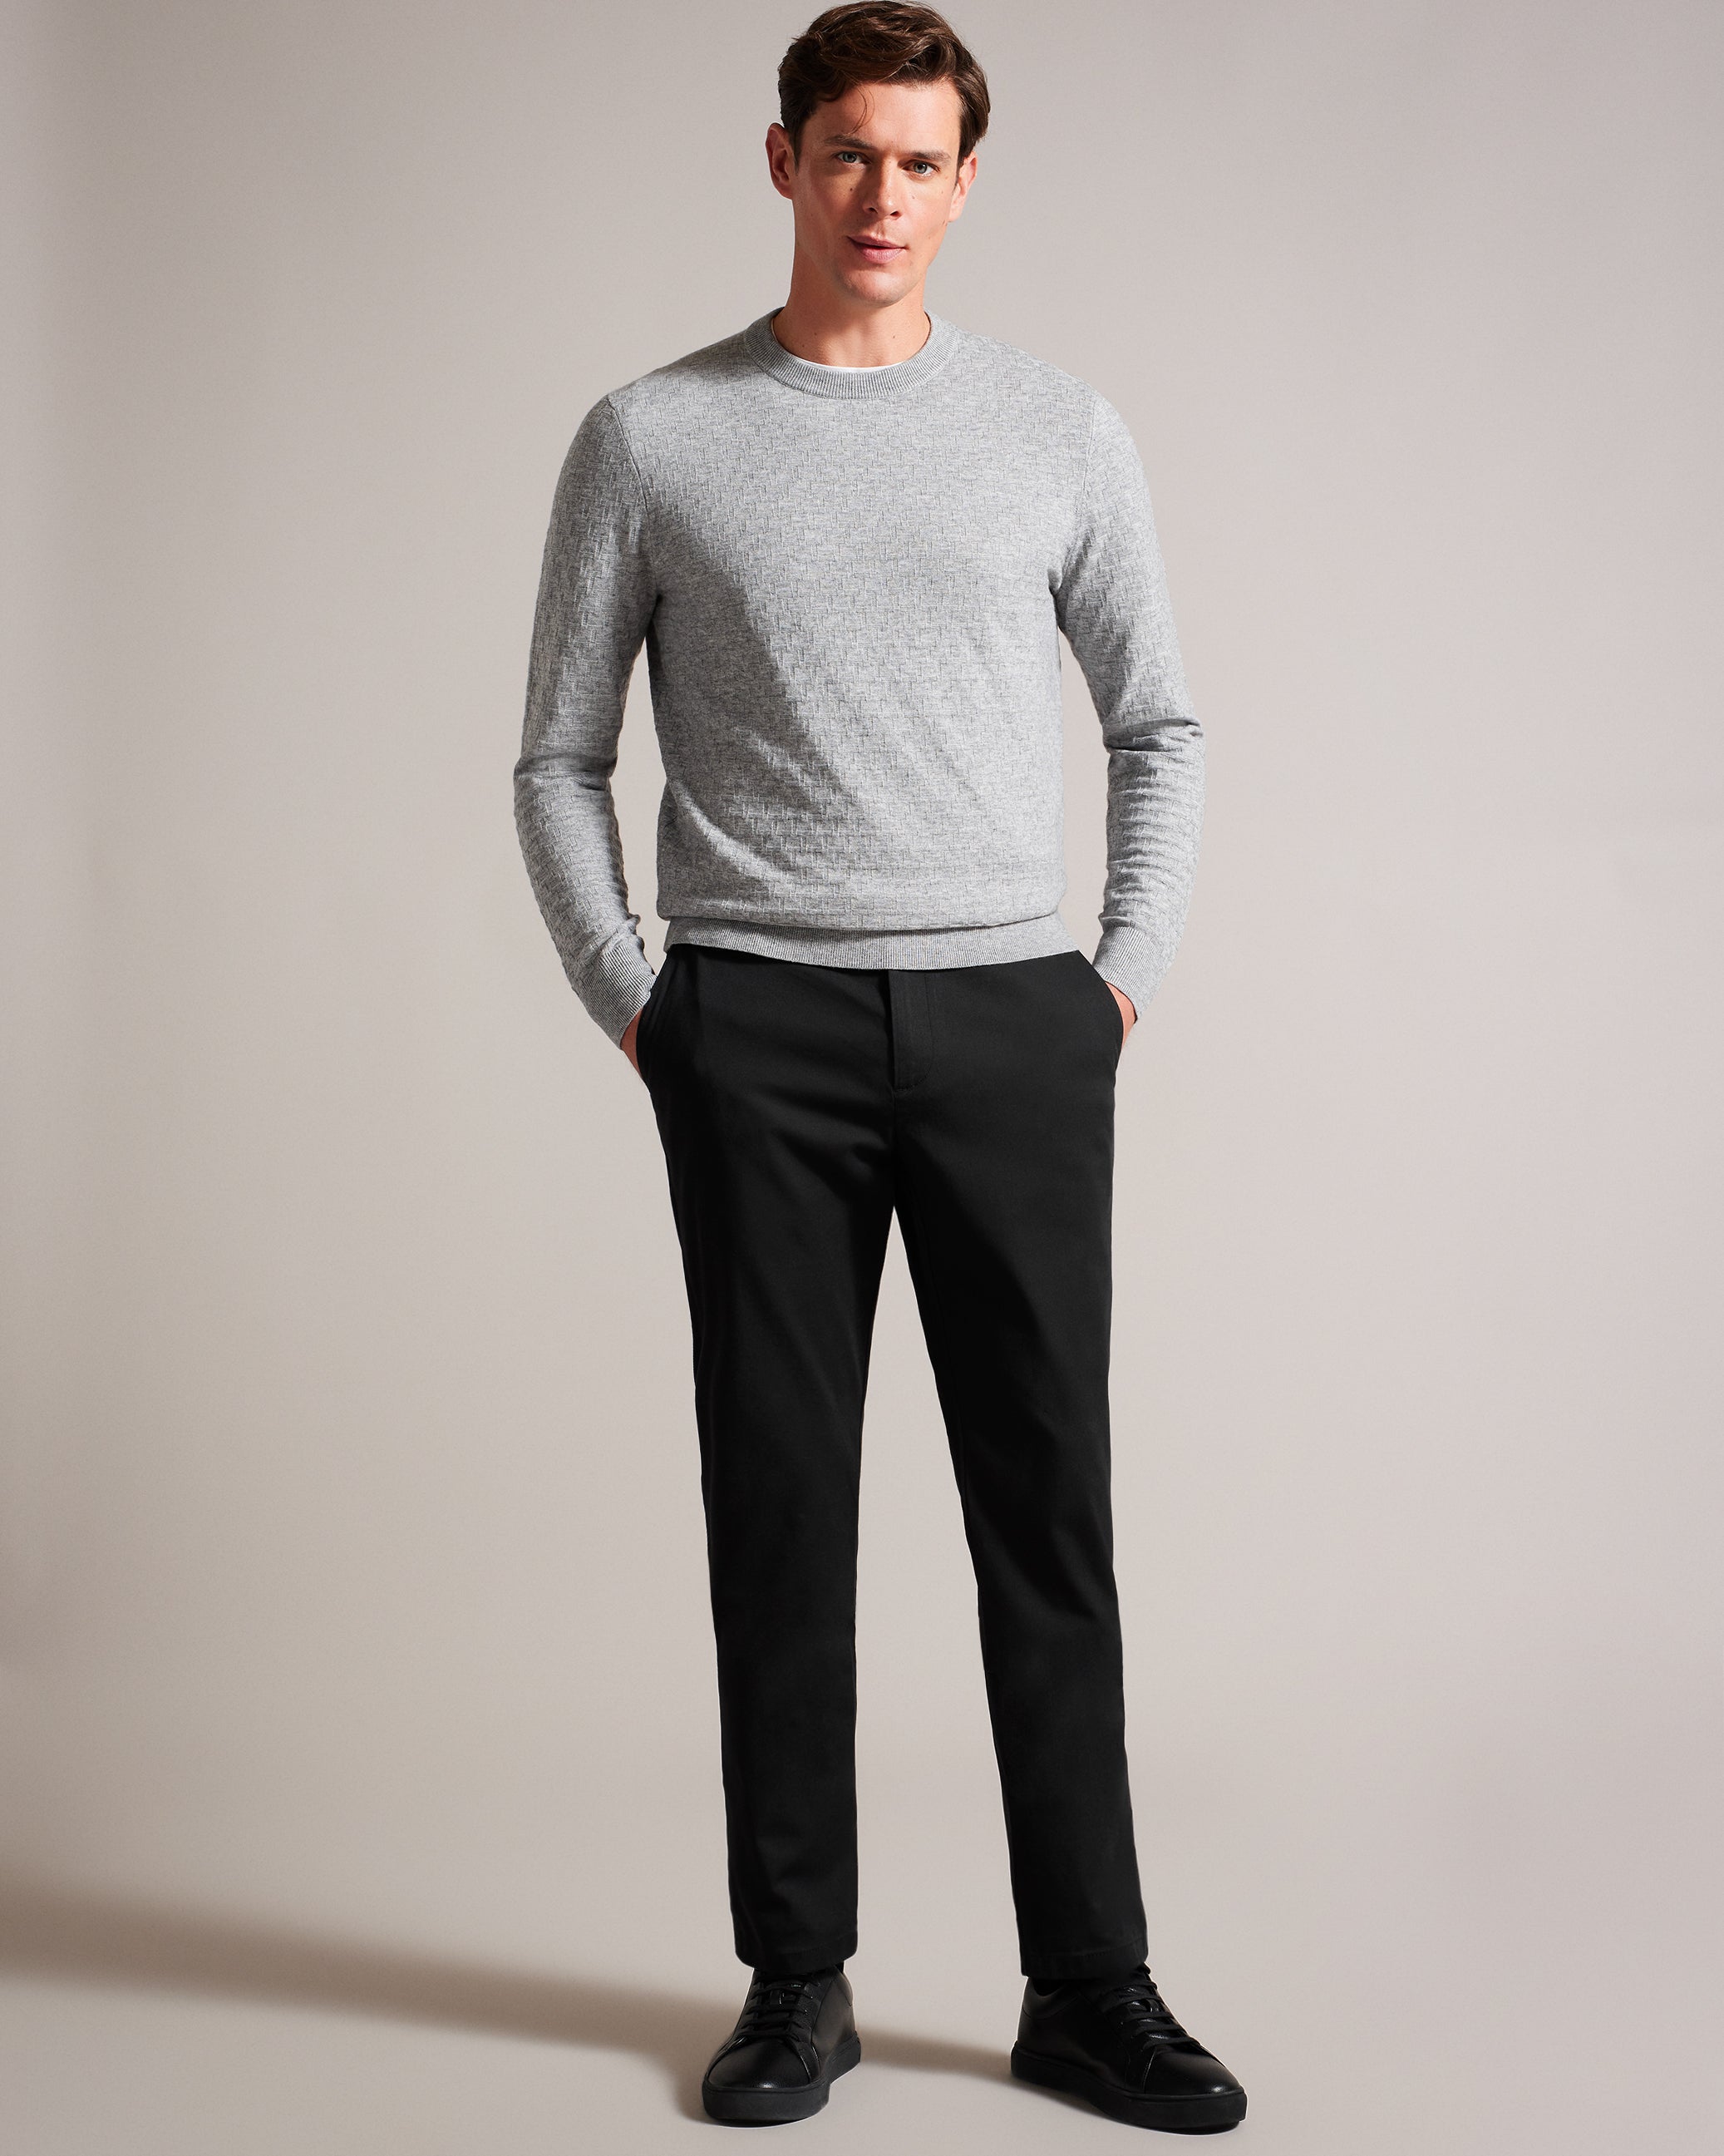 Men's Chinos – Ted Baker, United States